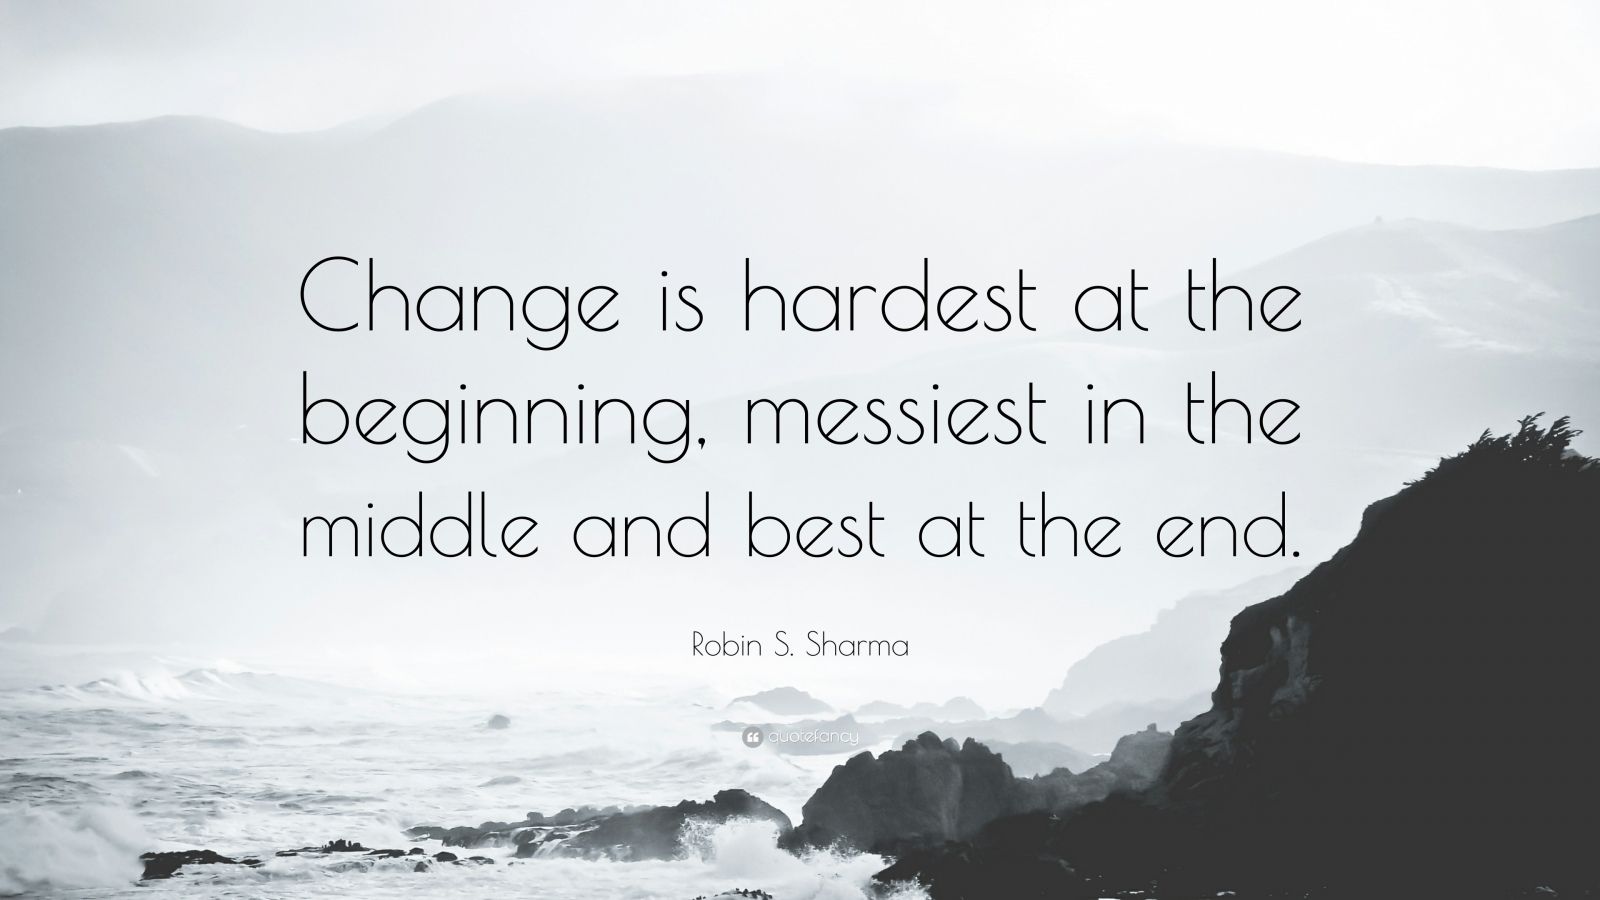 Robin S. Sharma Quote: “Change is hardest at the beginning, messiest in